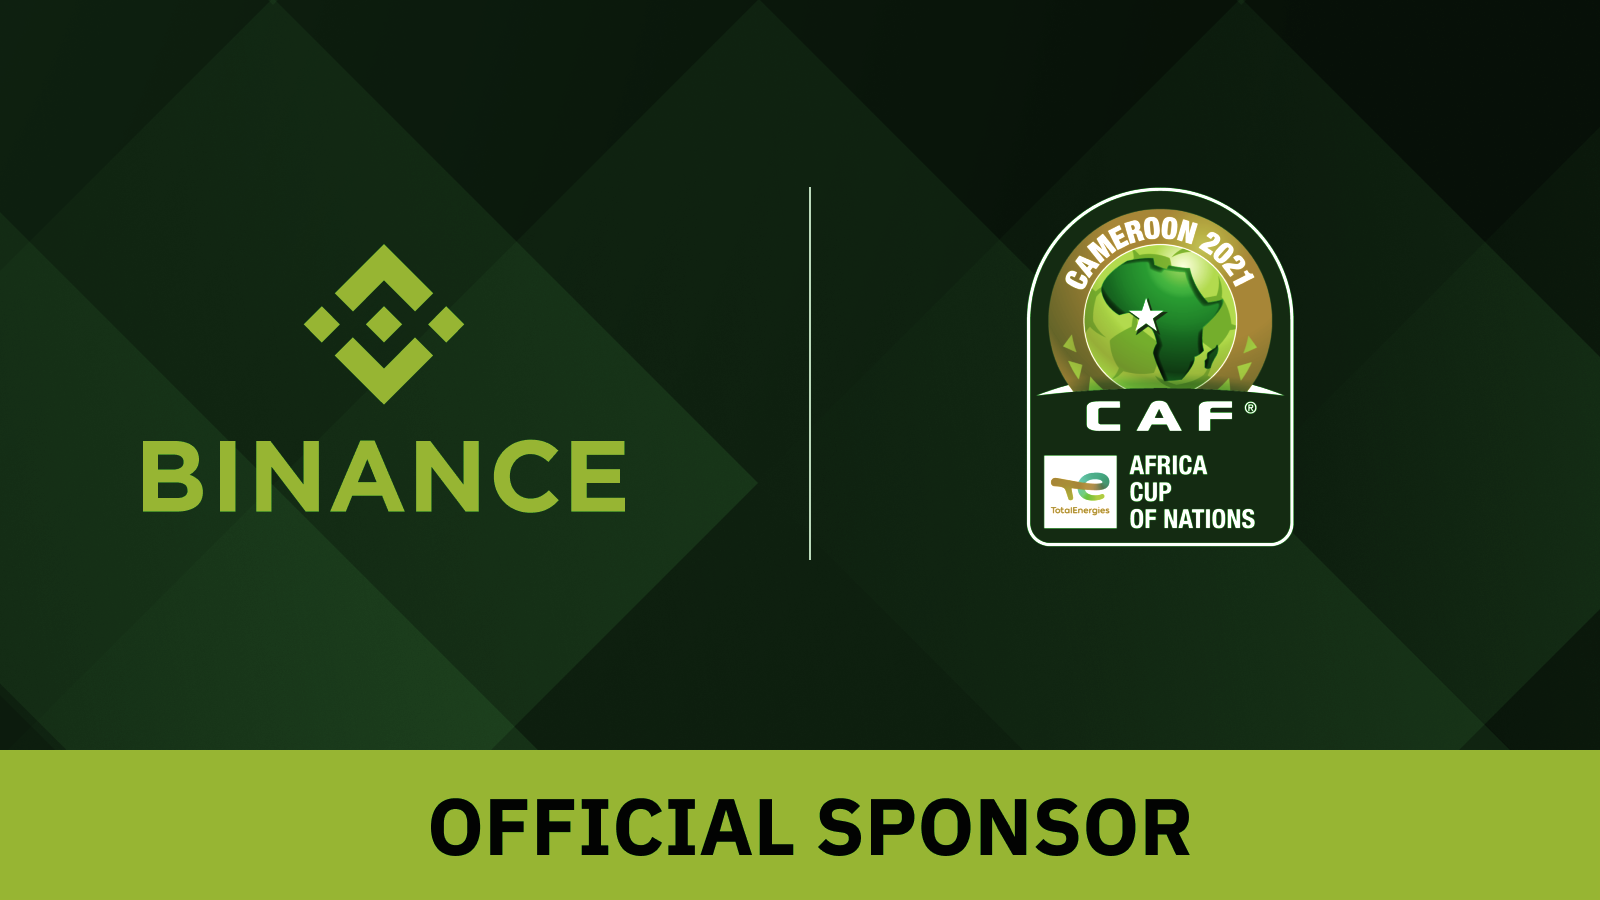 Binance Announces Official Sponsorship Deal for African Cup of Nations